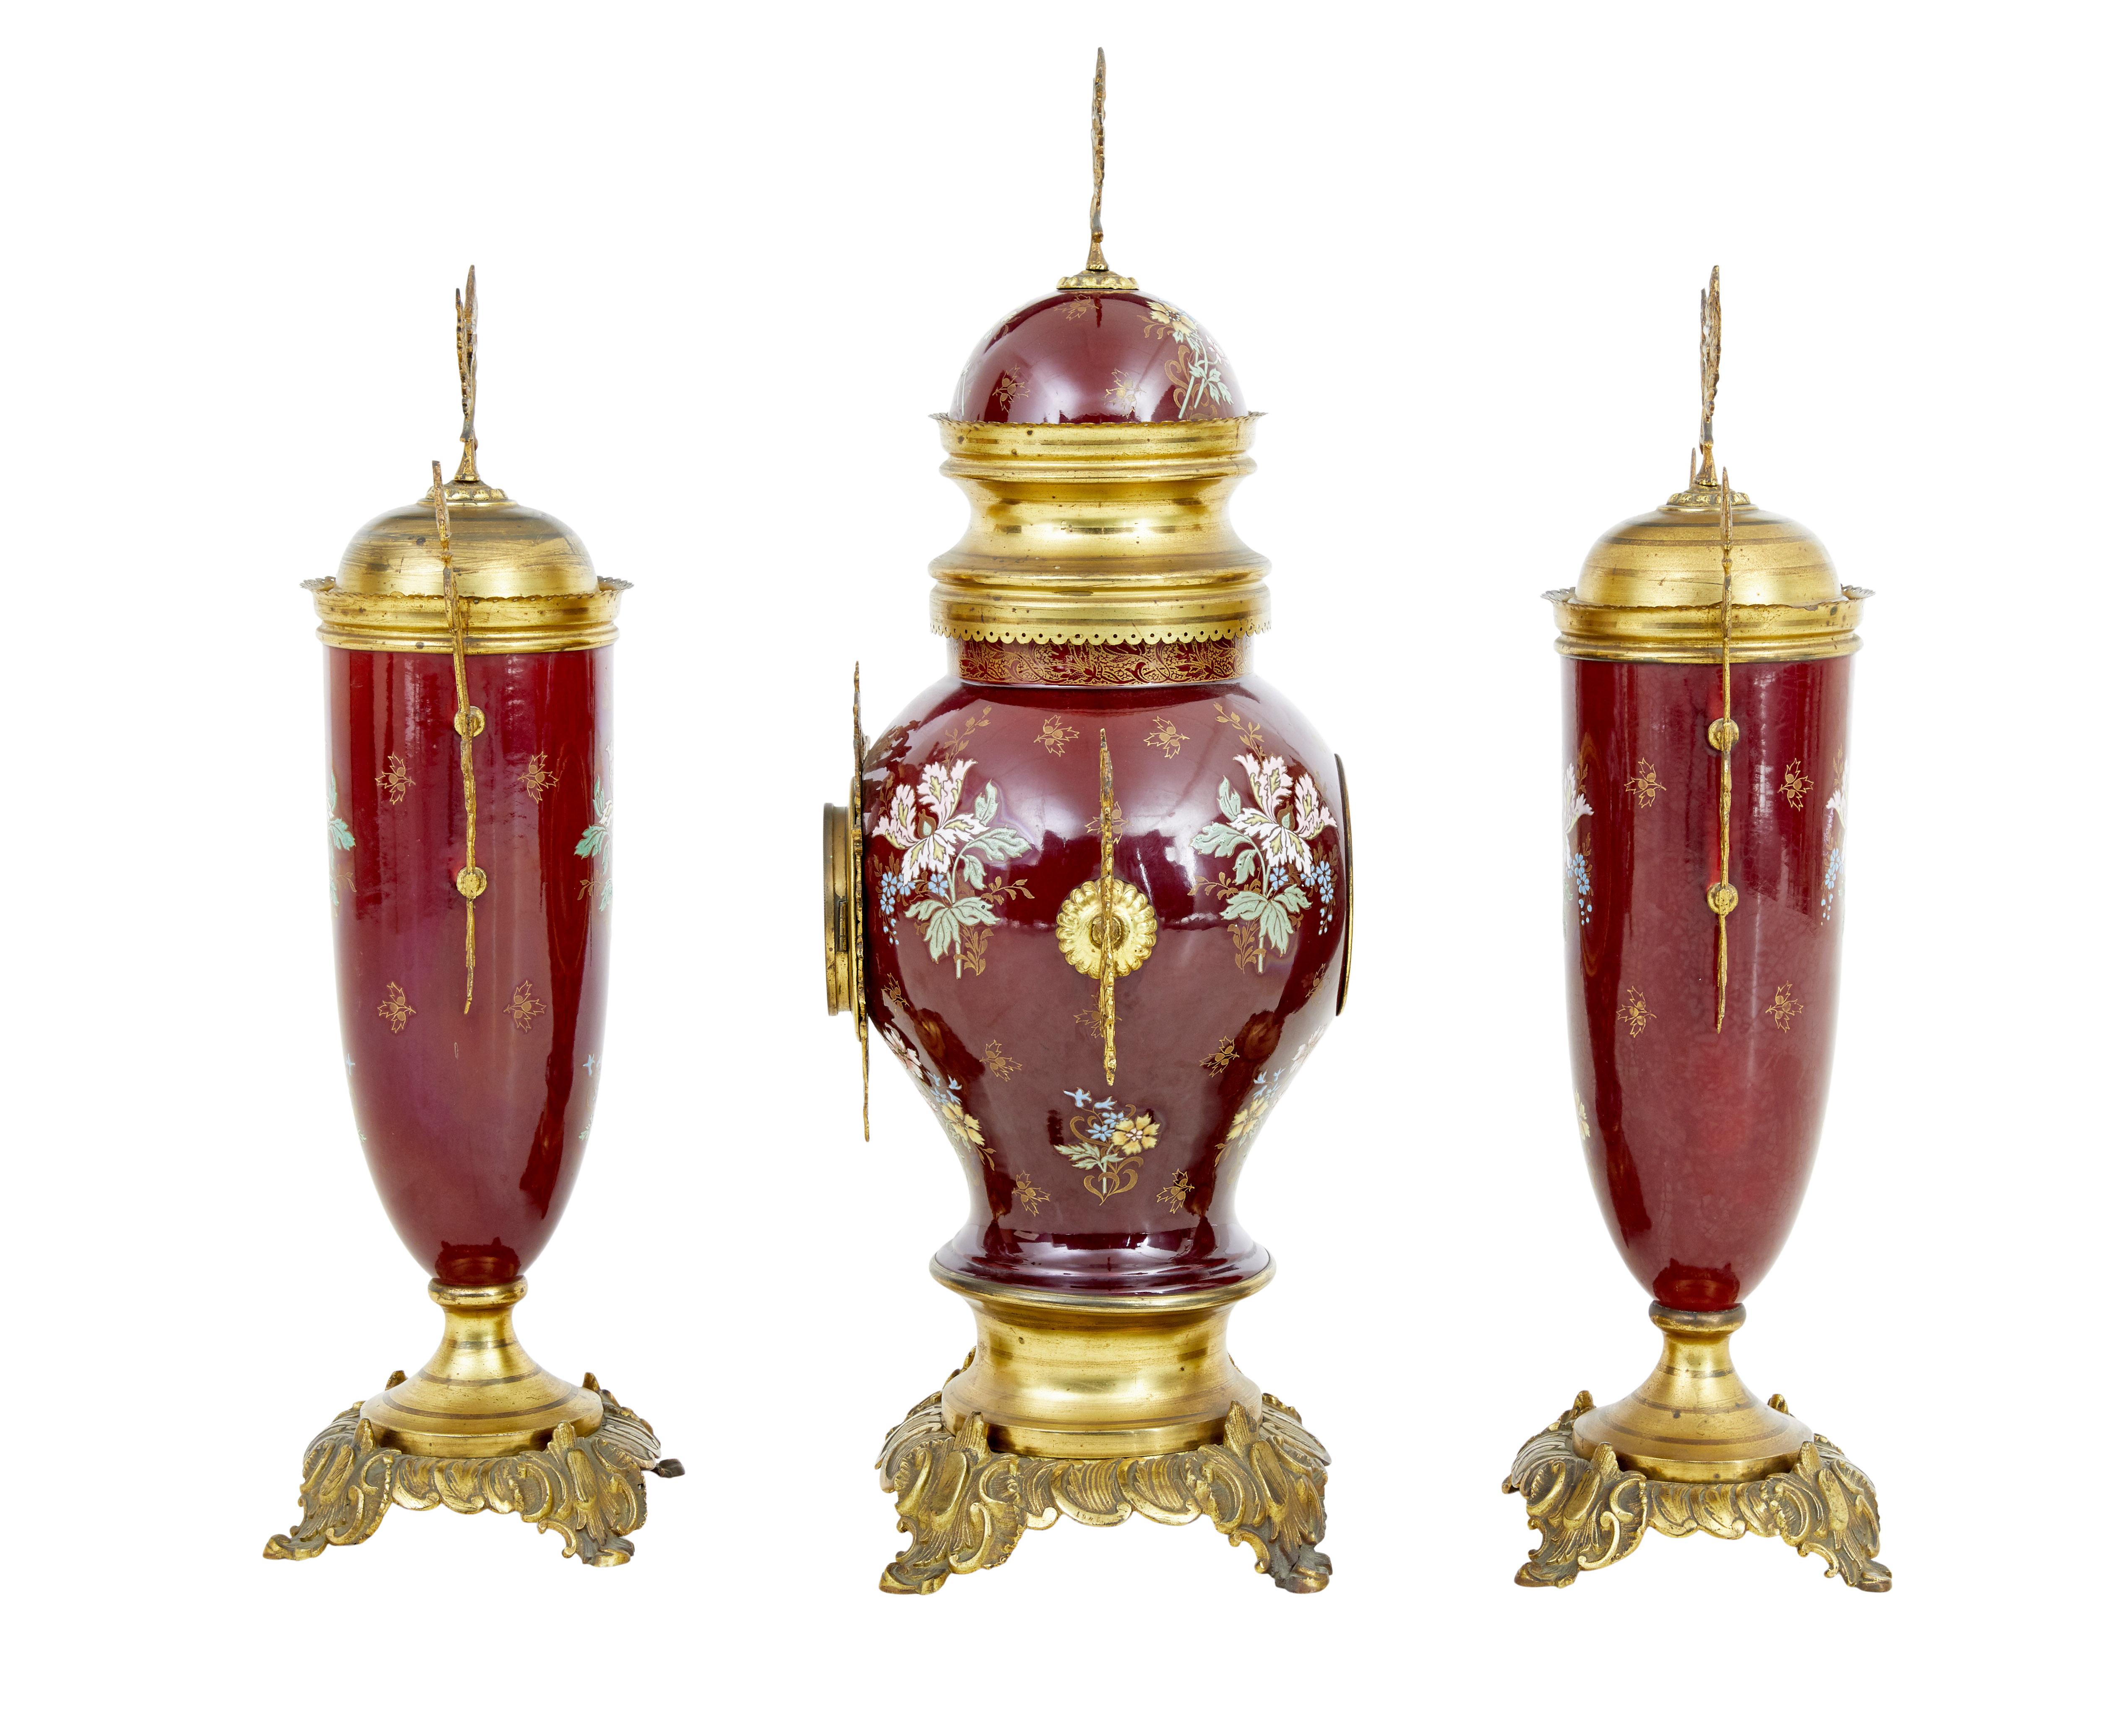 19th century French decorative toleware garniture set, circa 1880.

Fine example of a 3 piece garniture set, hand painted toleware decorated with ornate ormolu mounts. Clock fitted with arabic numerals.

Some fading to ormolu.

We recommend that the